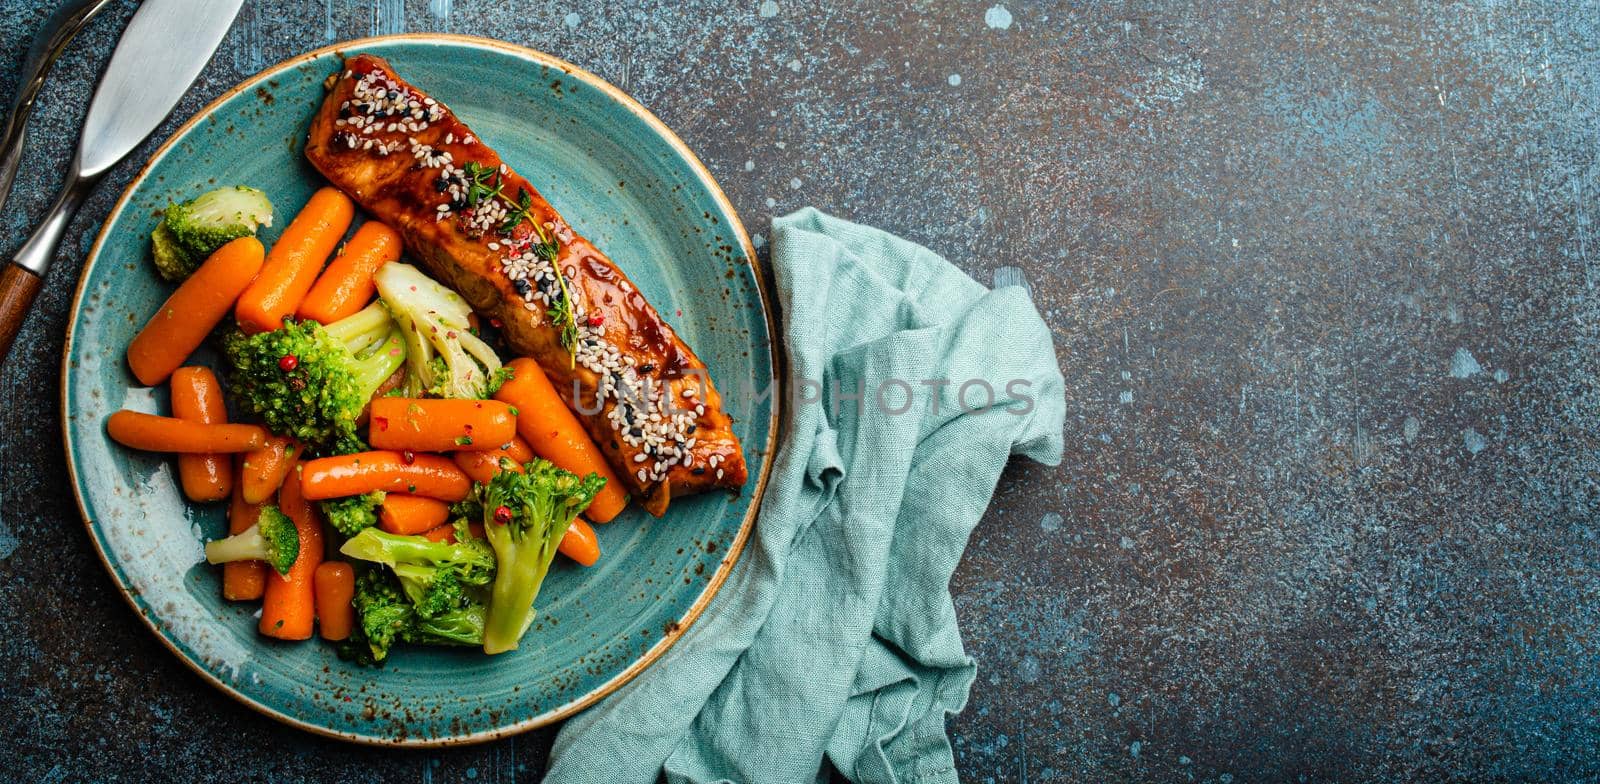 Grilled salmon fillet steak in teriyaki sauce with roasted vegetables carrot and broccoli by its_al_dente